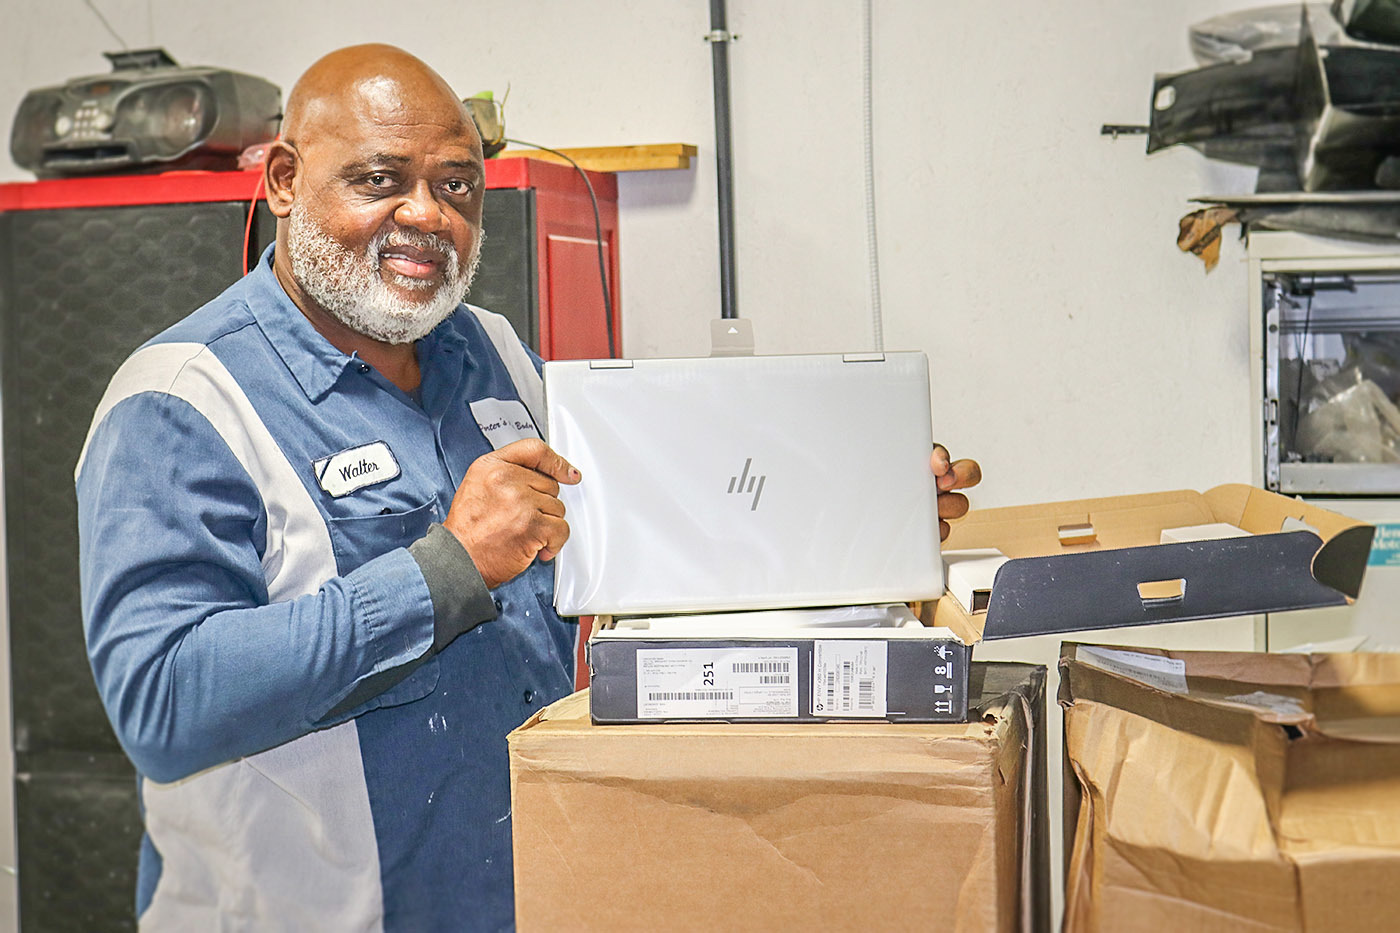 Epes has nine people in city leadership, so Mayor Porter made a priority to purchase laptops and other office equipment to allow everyone to work remotely during COVID-19.